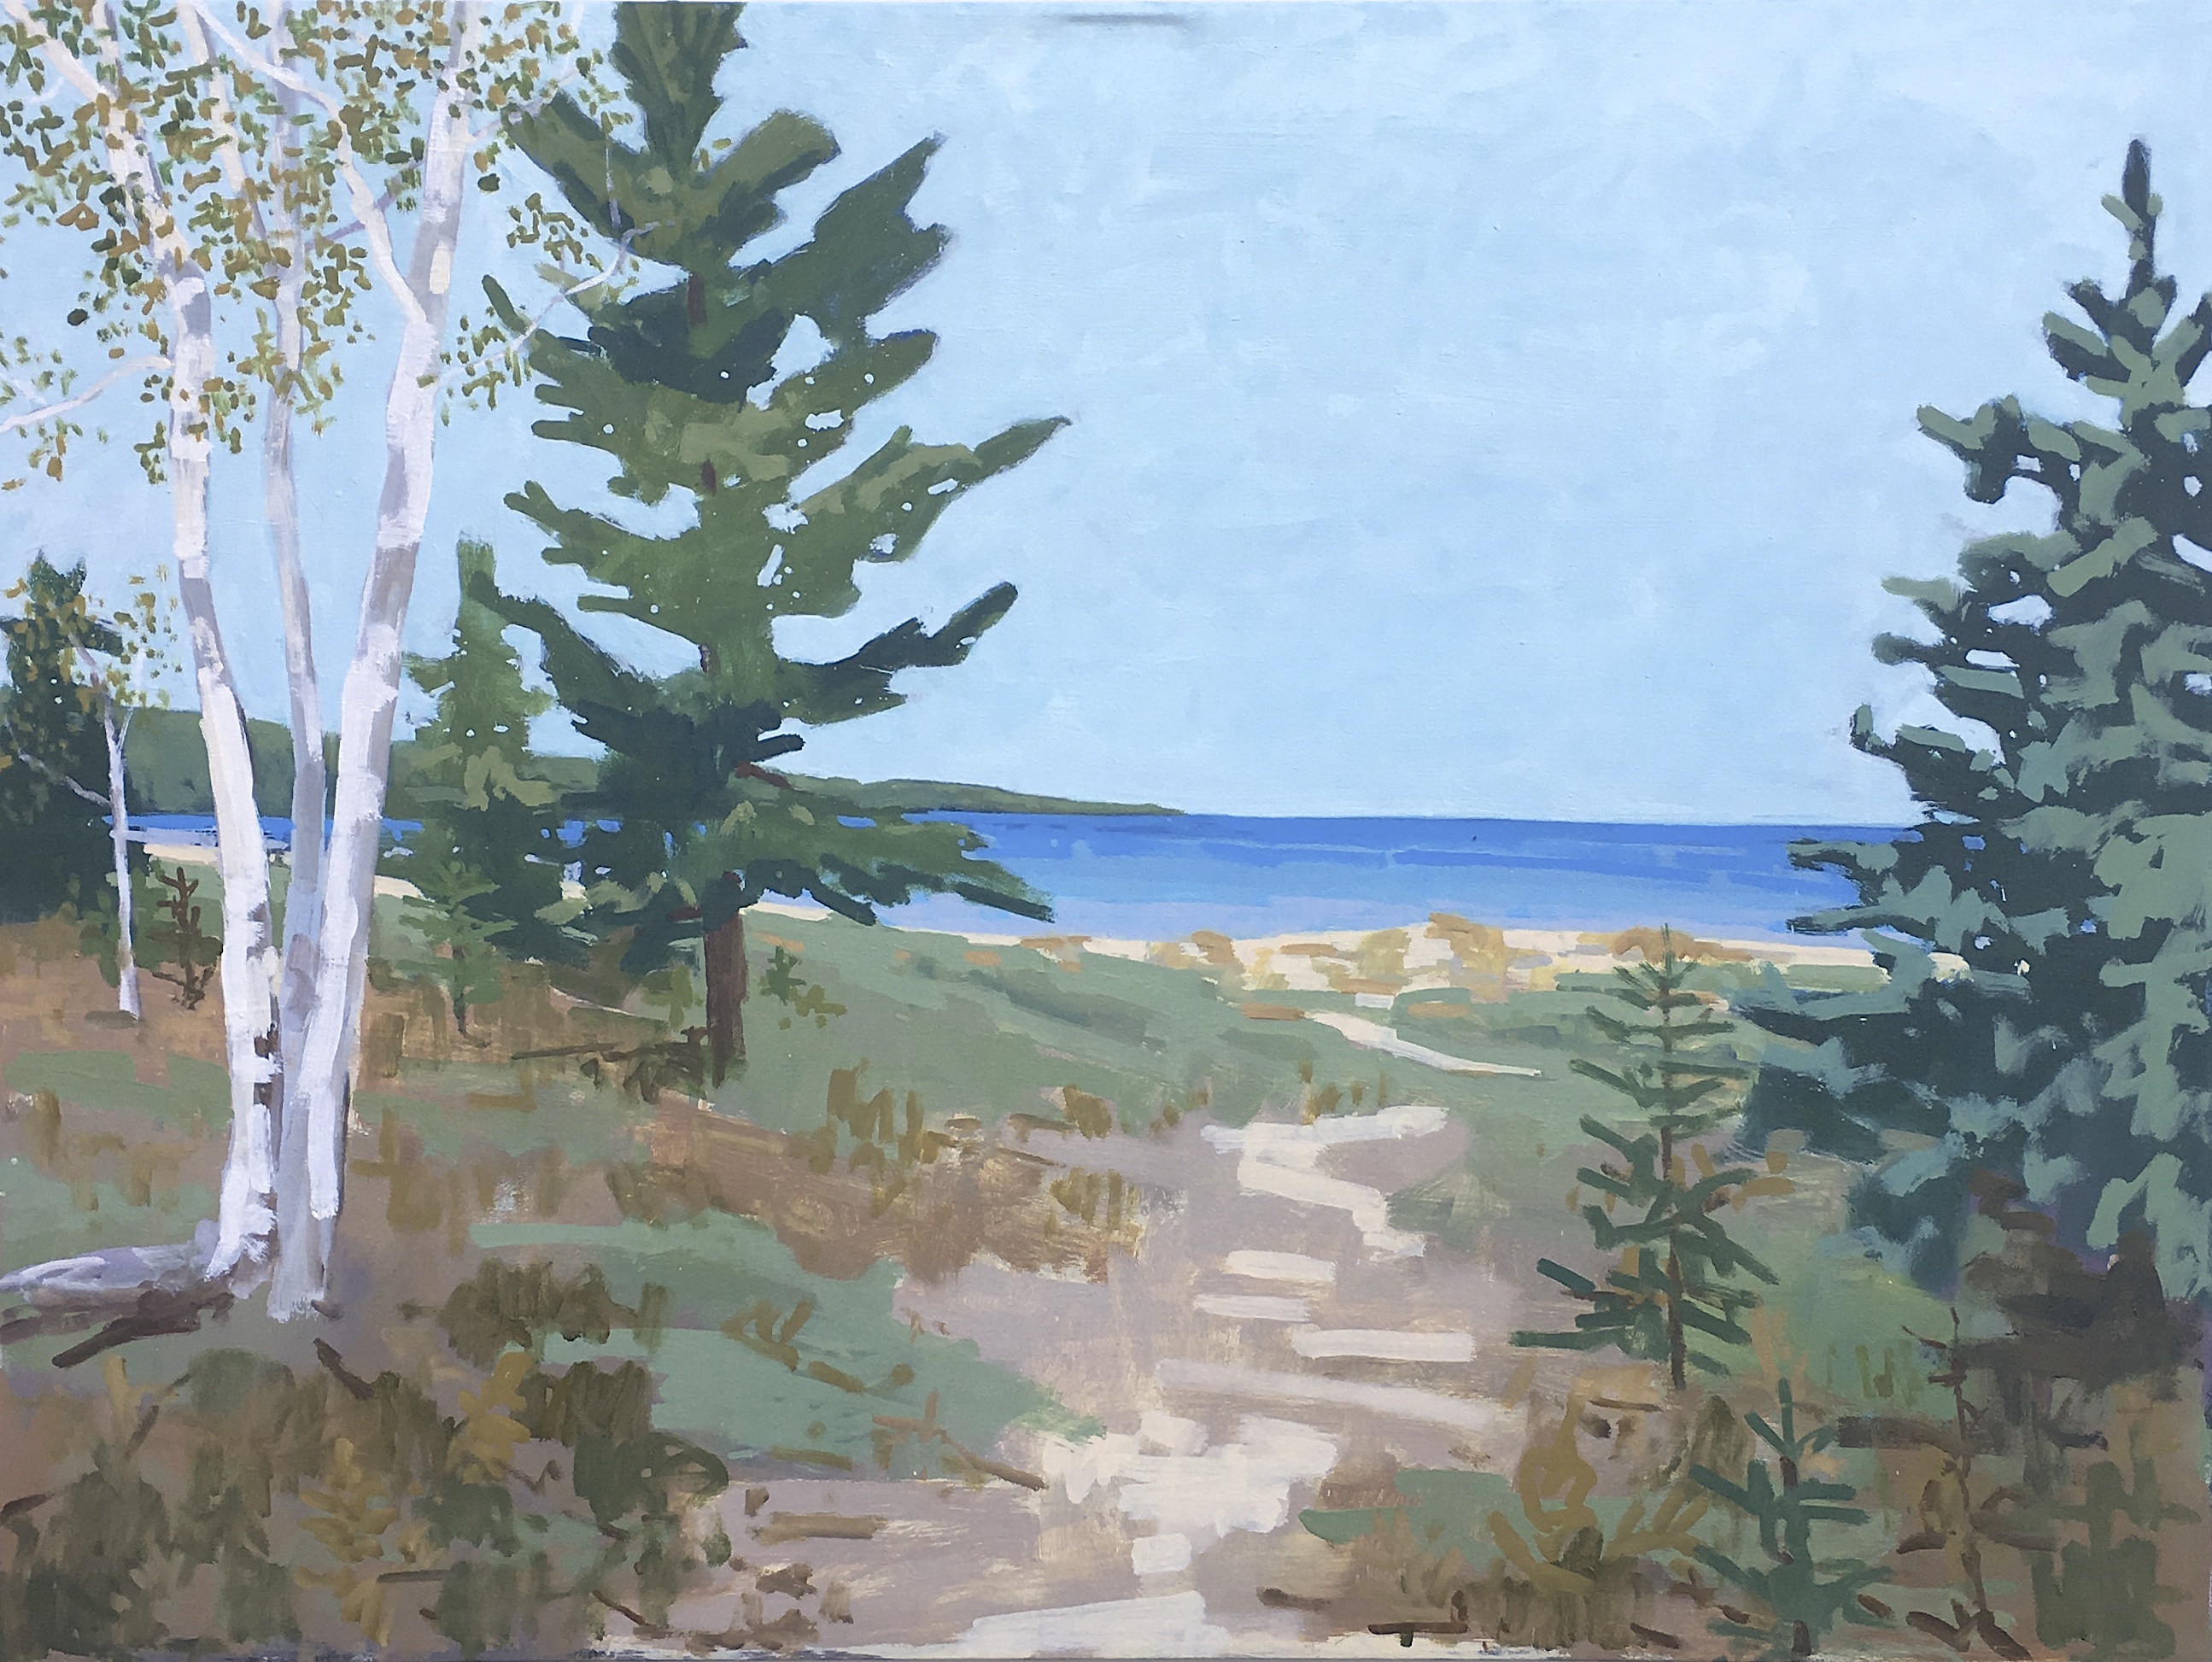 BIRCHES ON THE BEACH, oil on canvas, 36 x 48 inches